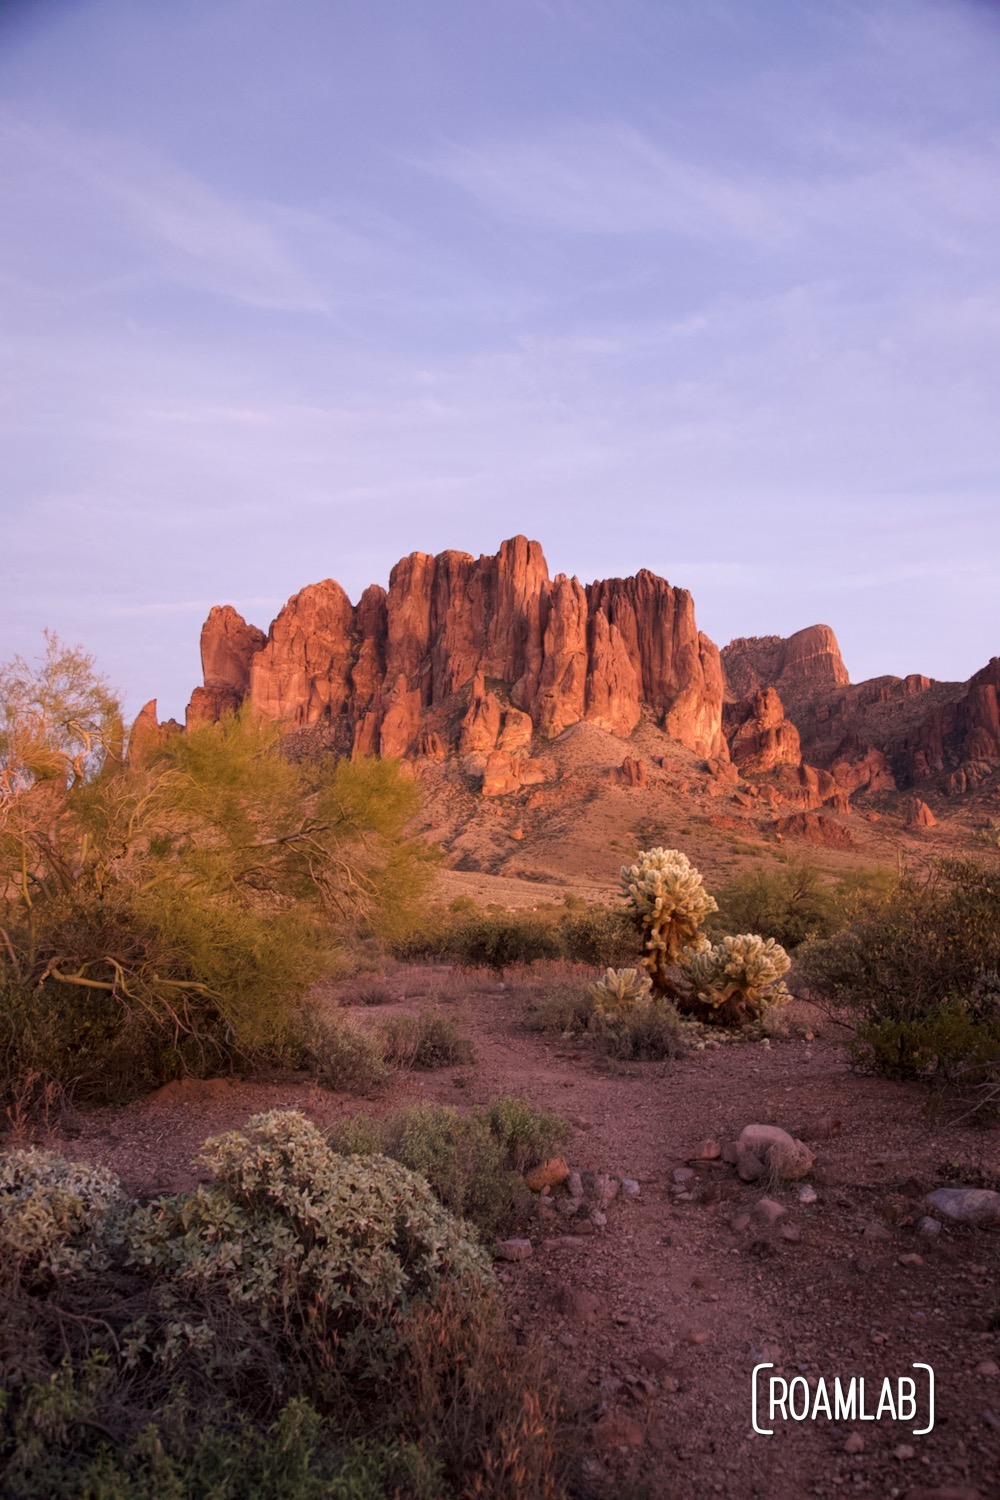 Warm evening light washes the Superstition Mountains in pink at the Lost Dutchman State Park in Arizona.